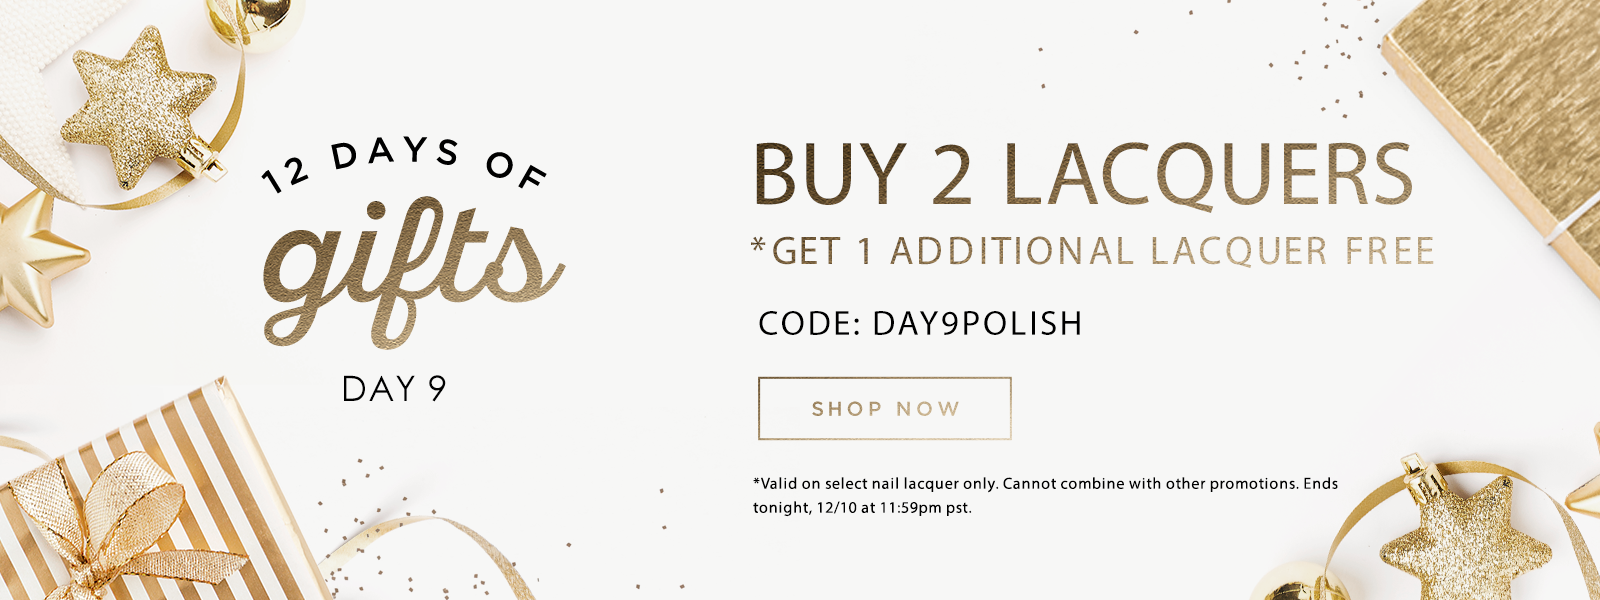 12 Days of Gifts: Day 9 - Buy 2 Lacquers, Get An Additional 1 Free